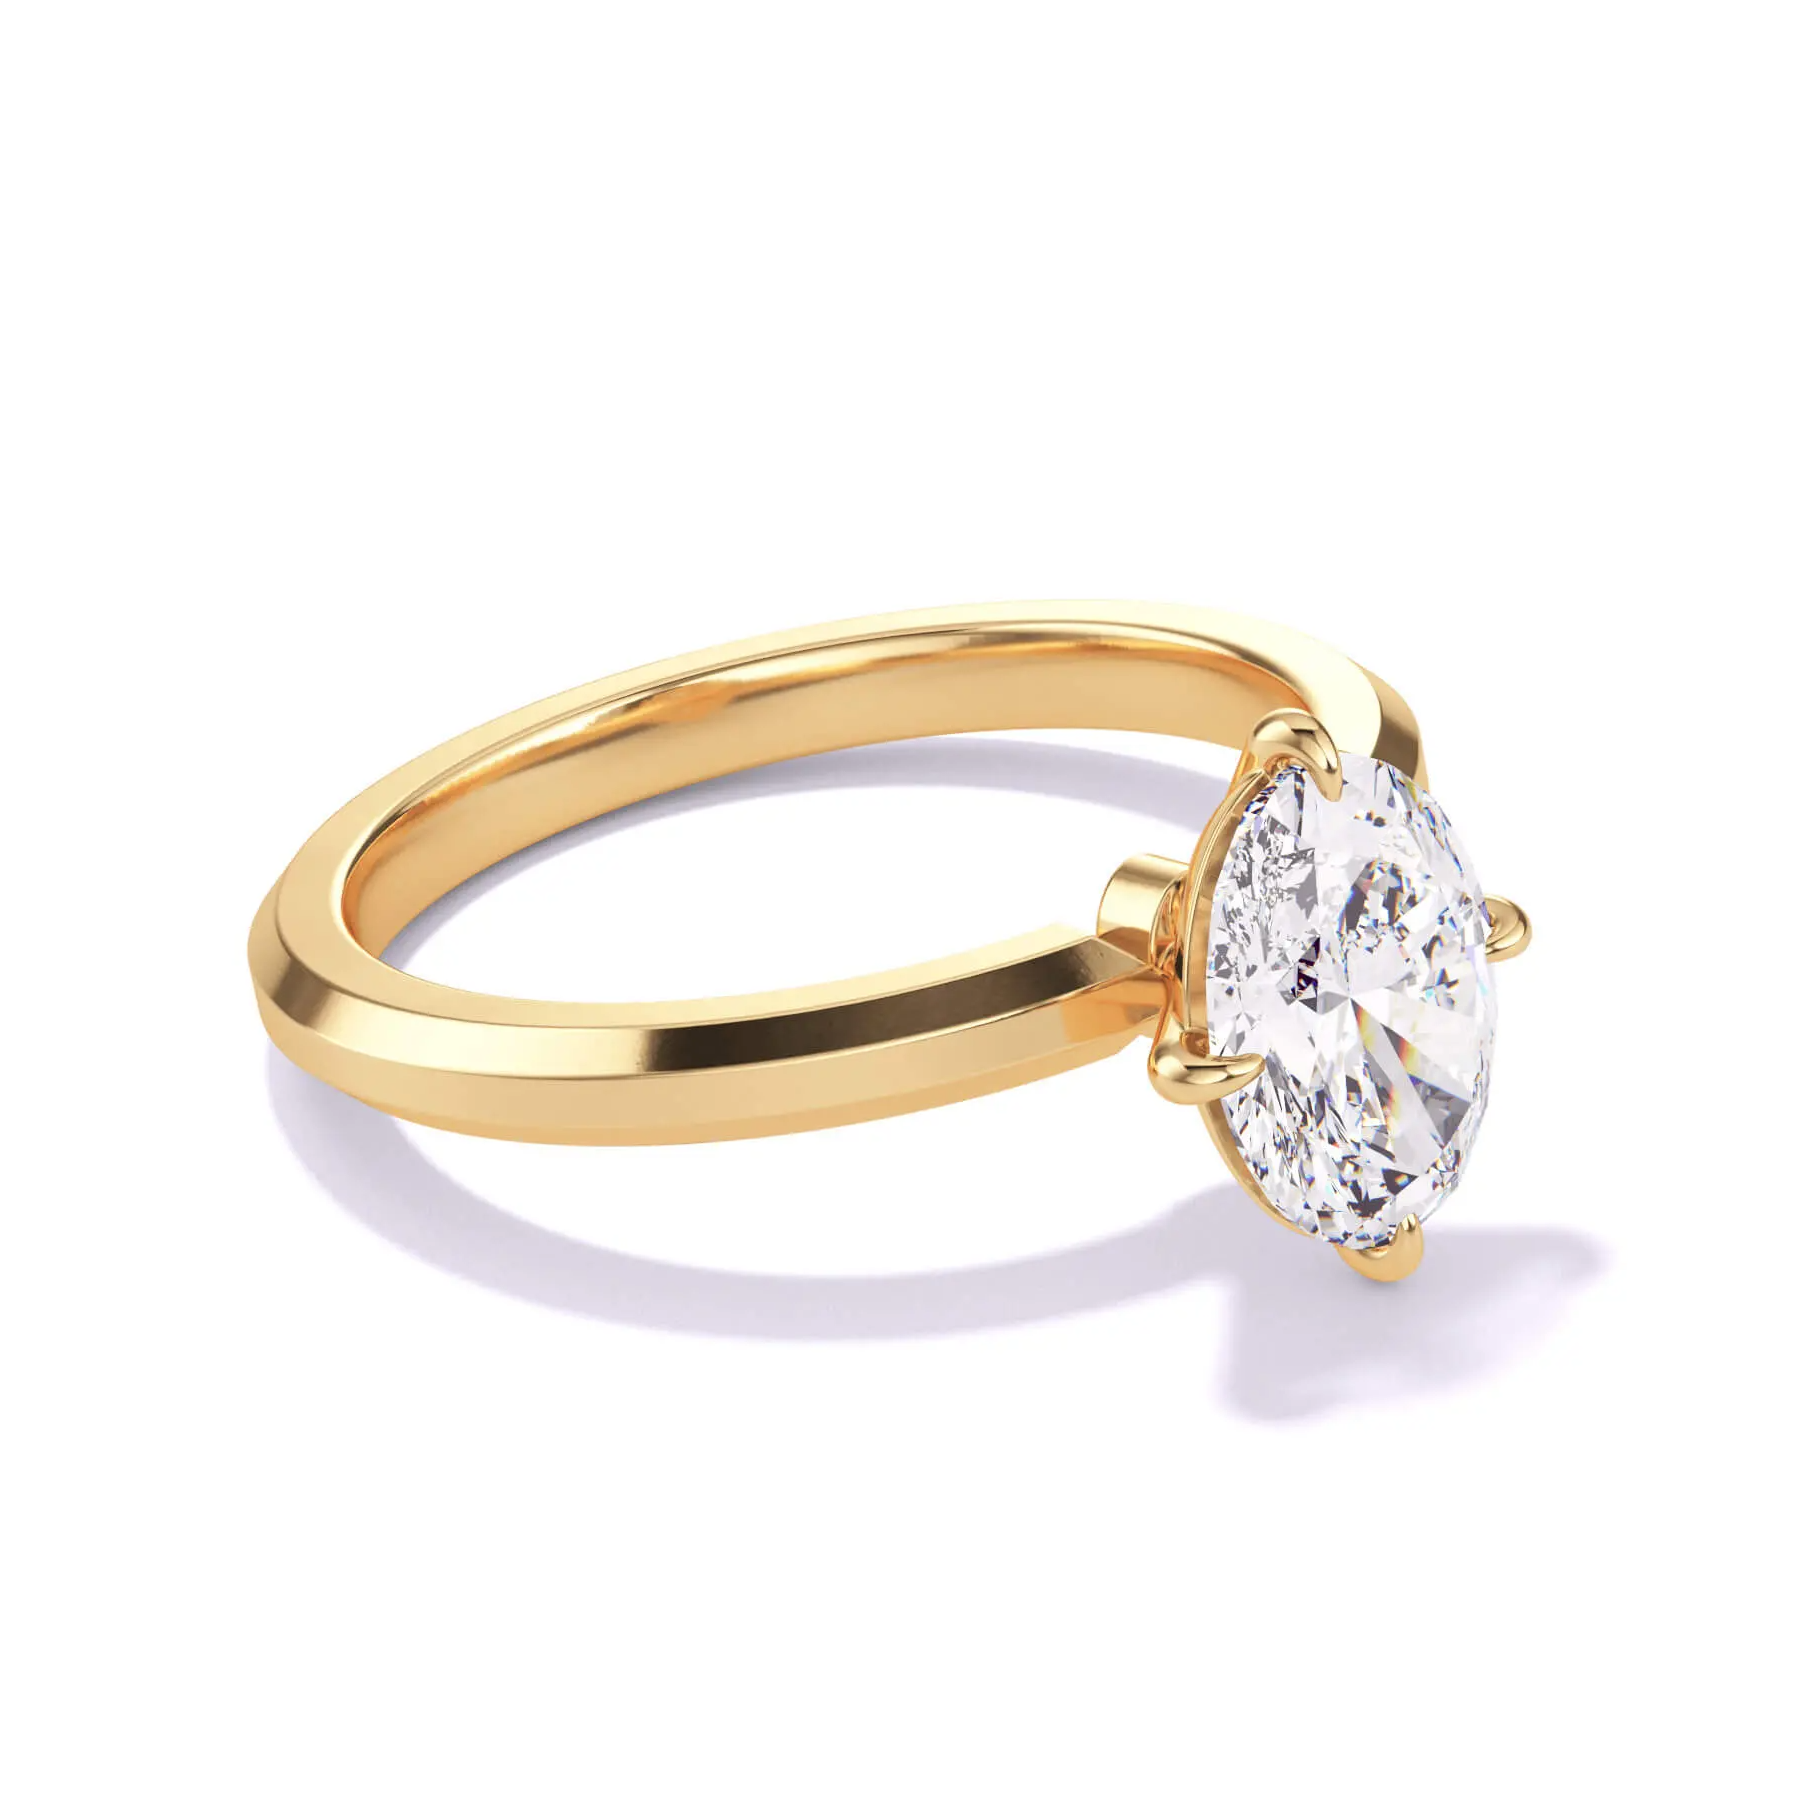 $10,000 diamond engagement ring - oval diamond in yellow gold